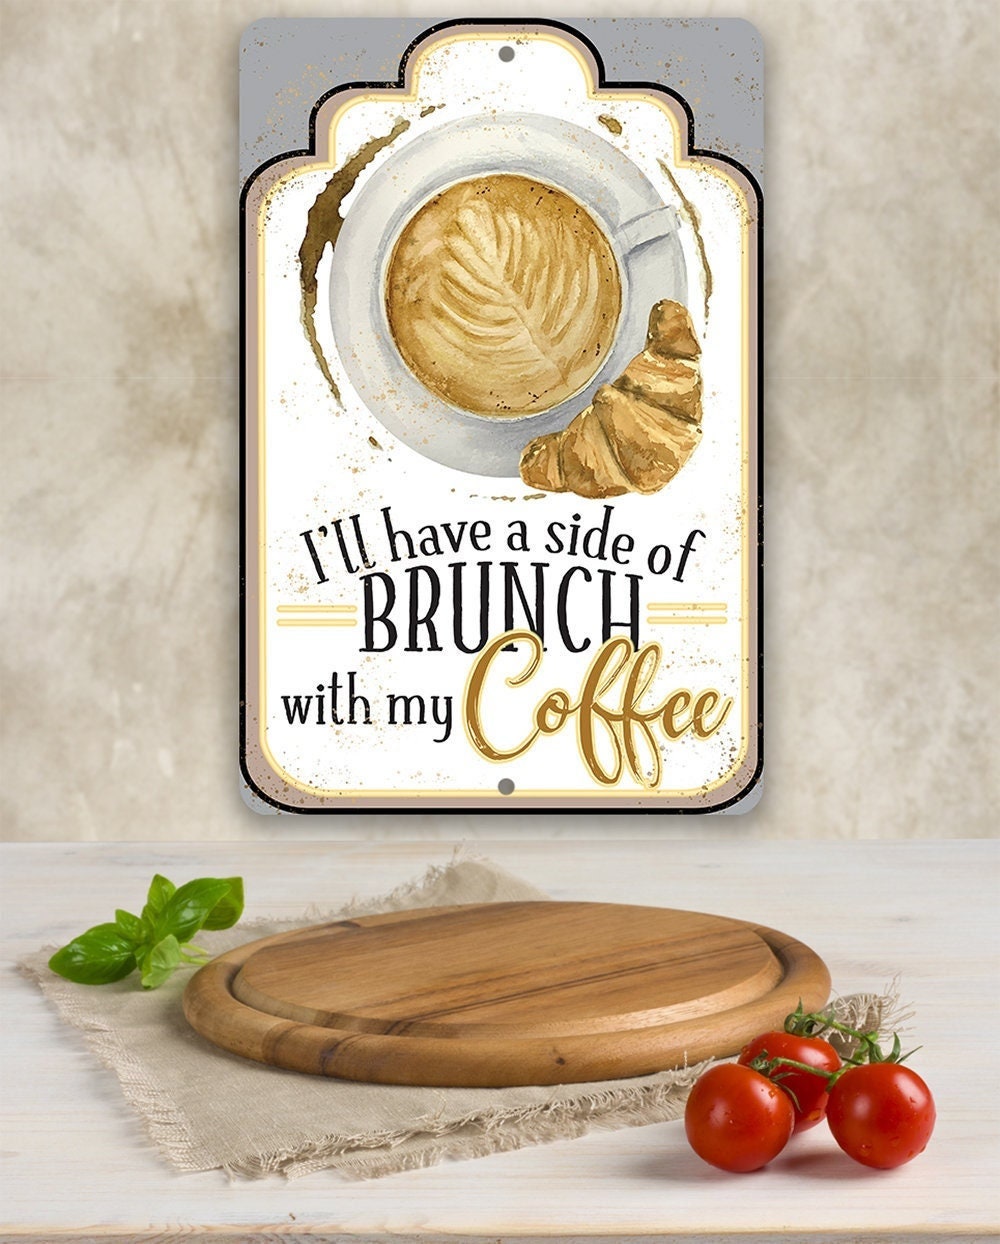 I'll Have A Side Of Brunch With My Coffee - 8" x 12" or 12" x 18" Aluminum Tin Awesome Metal Poster Lone Star Art 